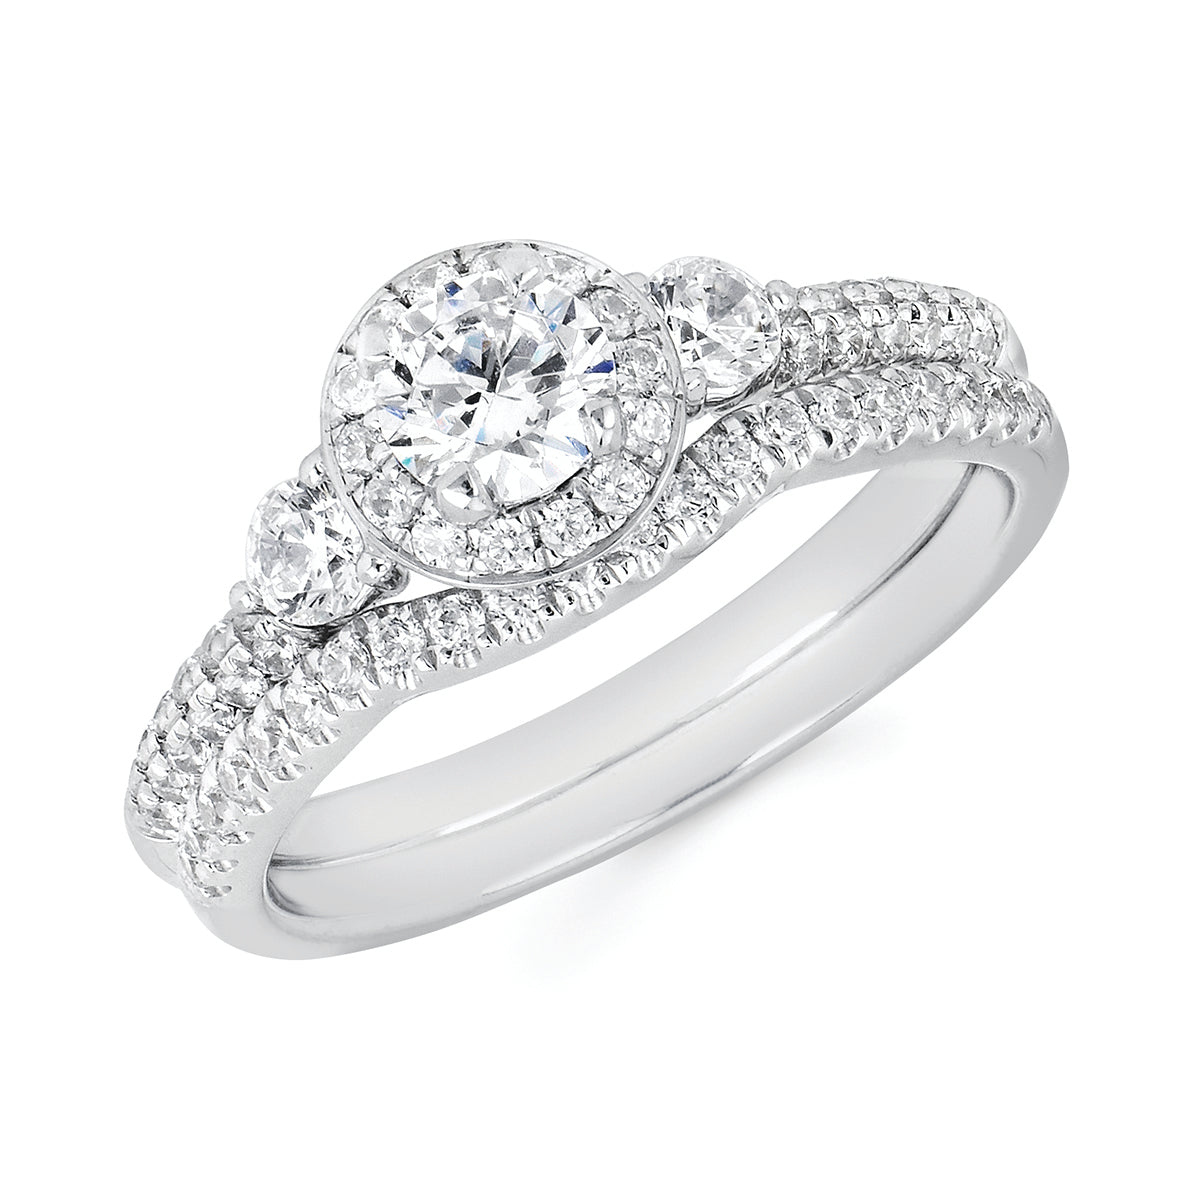 Halo Bridal: 1/2 Ctw. Diamond Halo Semi Mount available for 3/8 Ct. Round Center Diamond in 14K Gold